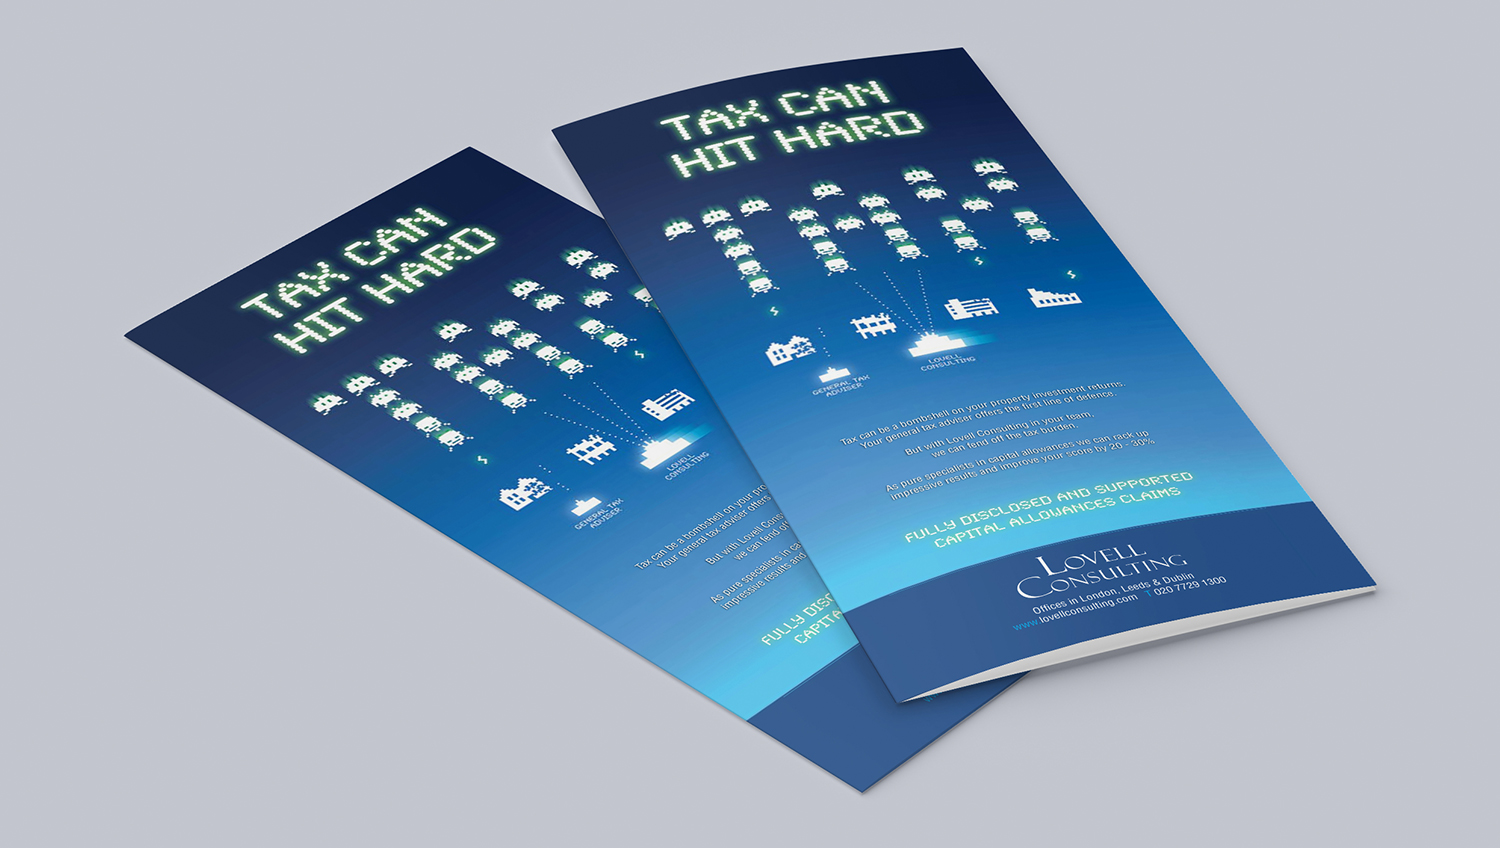 Lovell Consulting Space Invaders themed leaflet - Main image